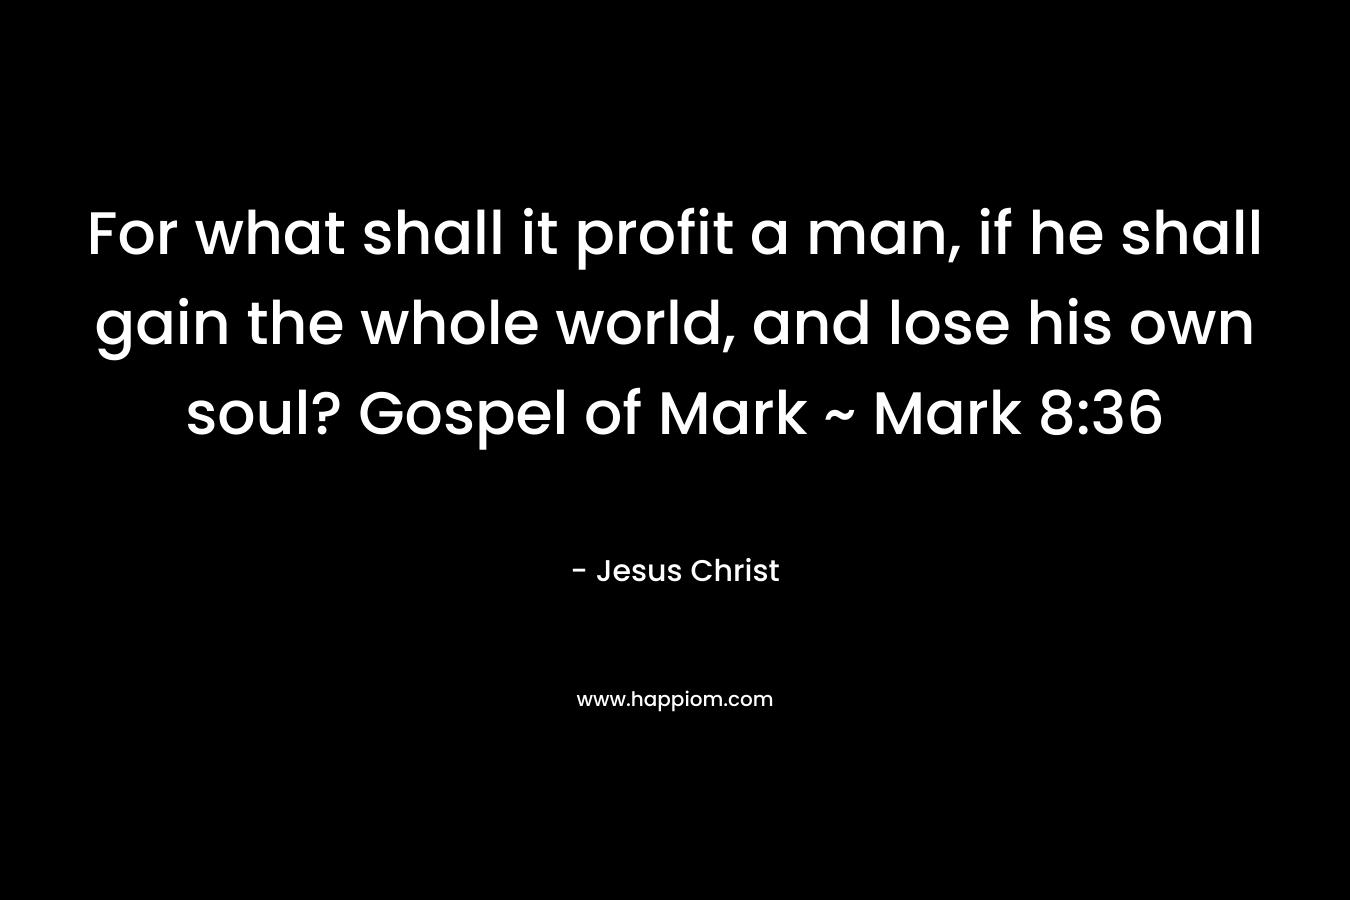 For what shall it profit a man, if he shall gain the whole world, and lose his own soul? Gospel of Mark ~ Mark 8:36 – Jesus Christ